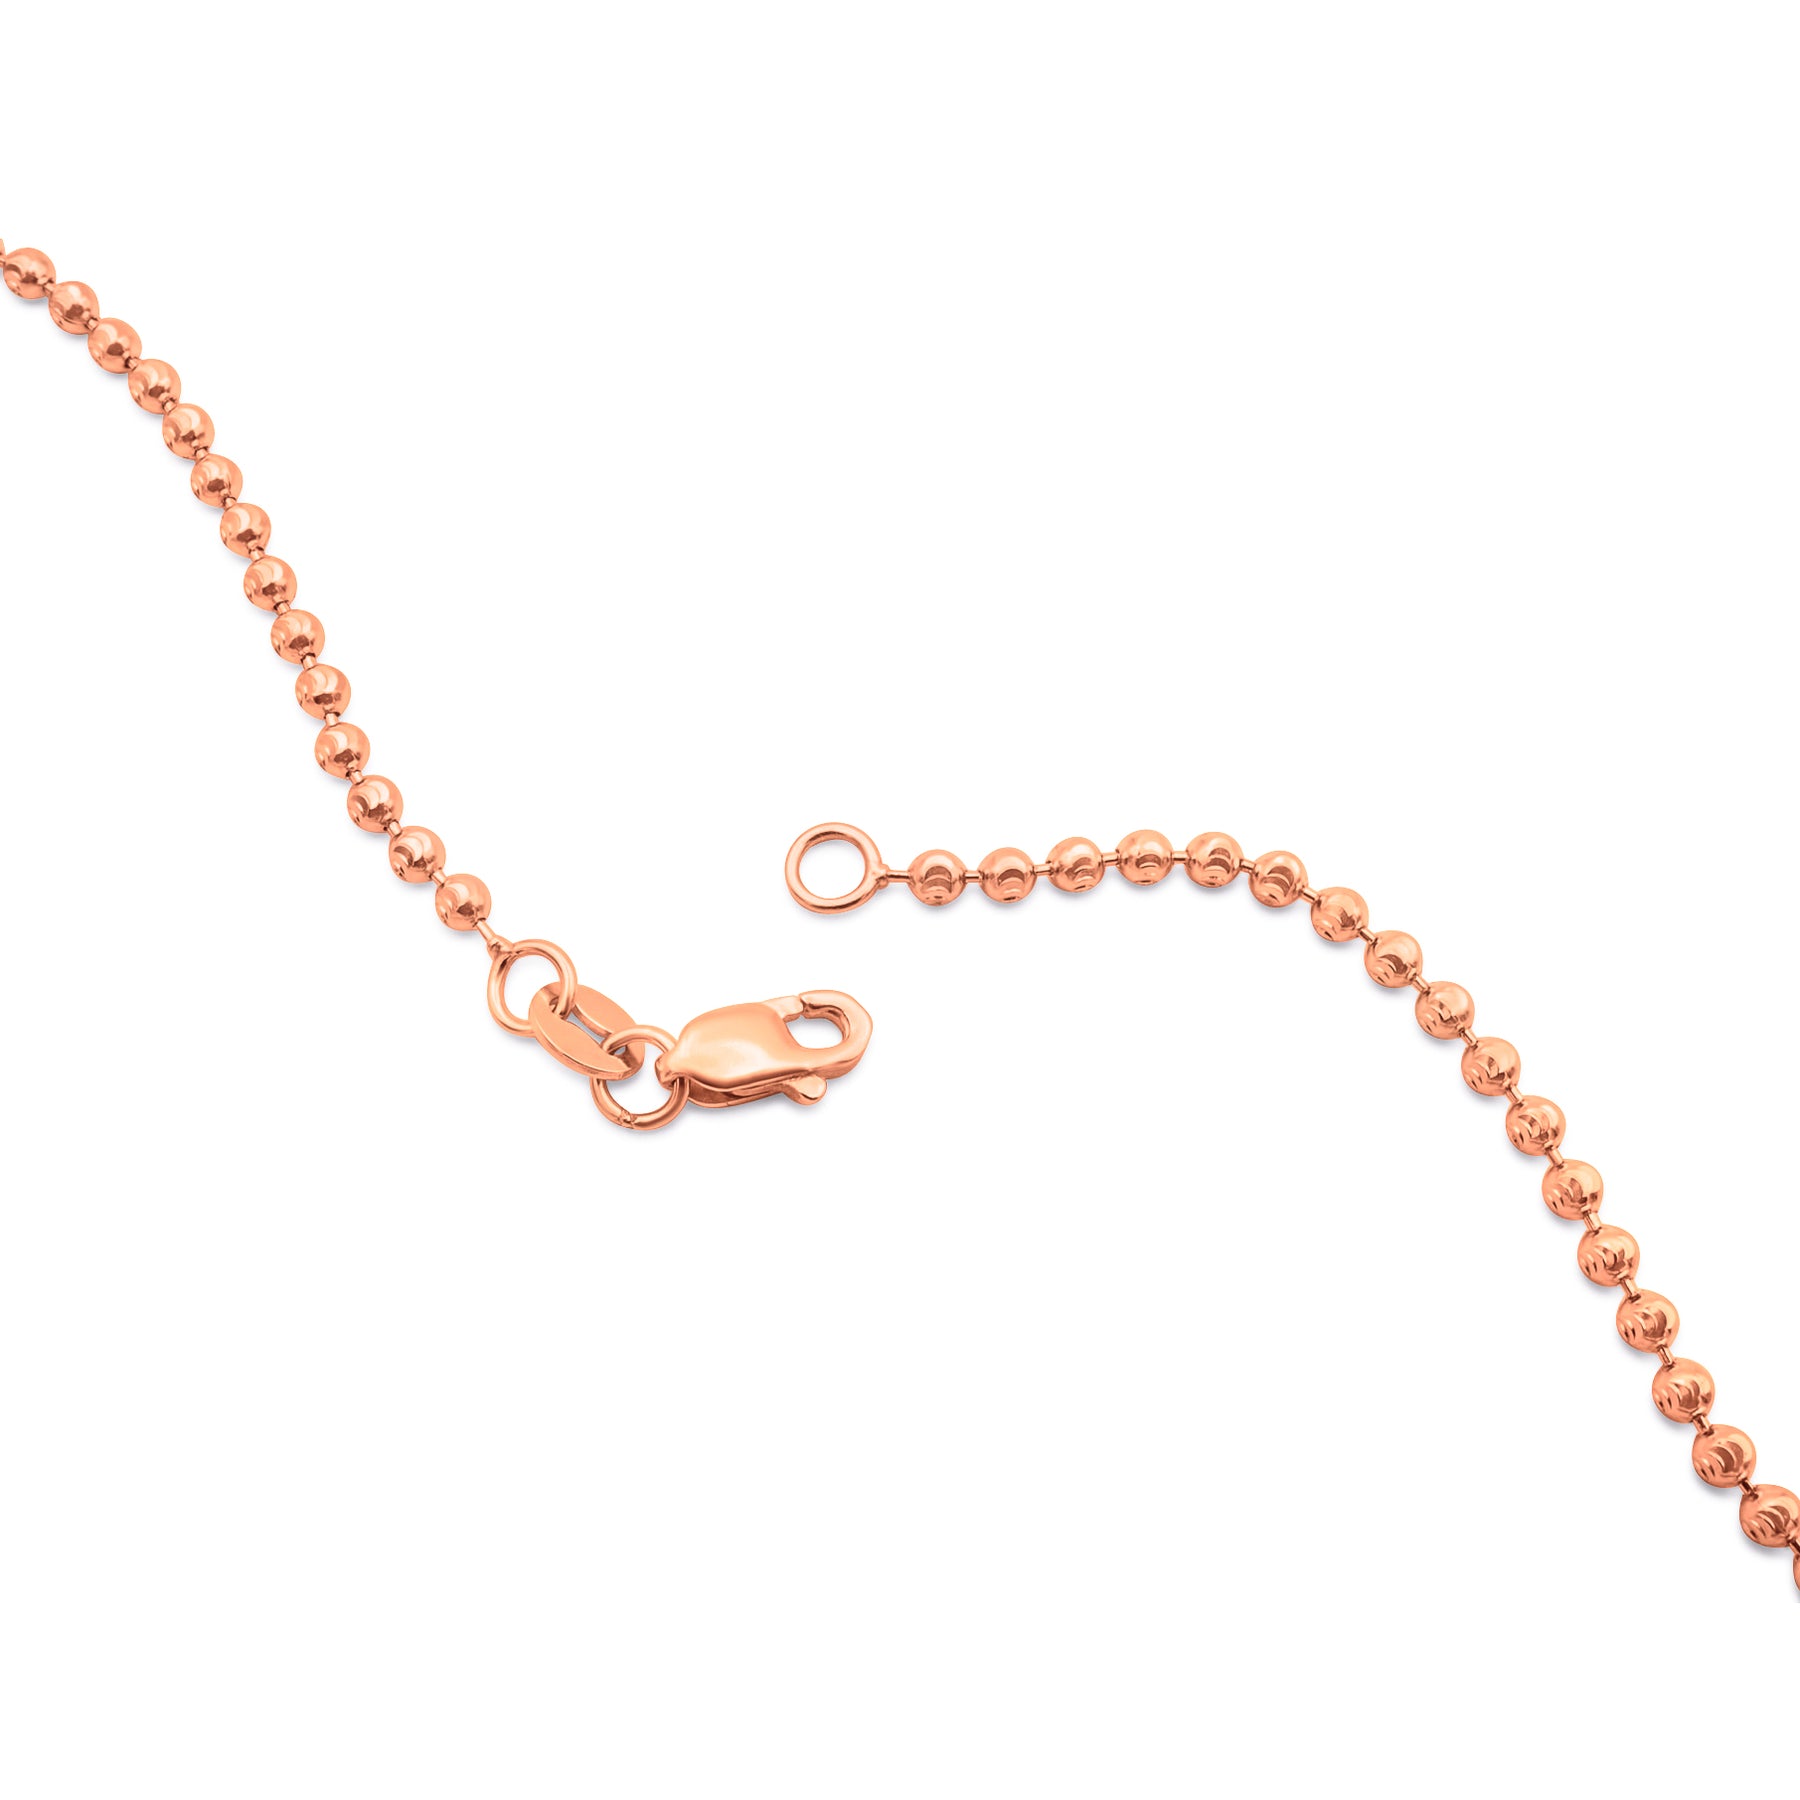 14K Solid Yellow Gold Ball Bead Chain 4mm 22 Inches - 27.30 Grams (Standard) / Rose Gold - Nyc Luxury